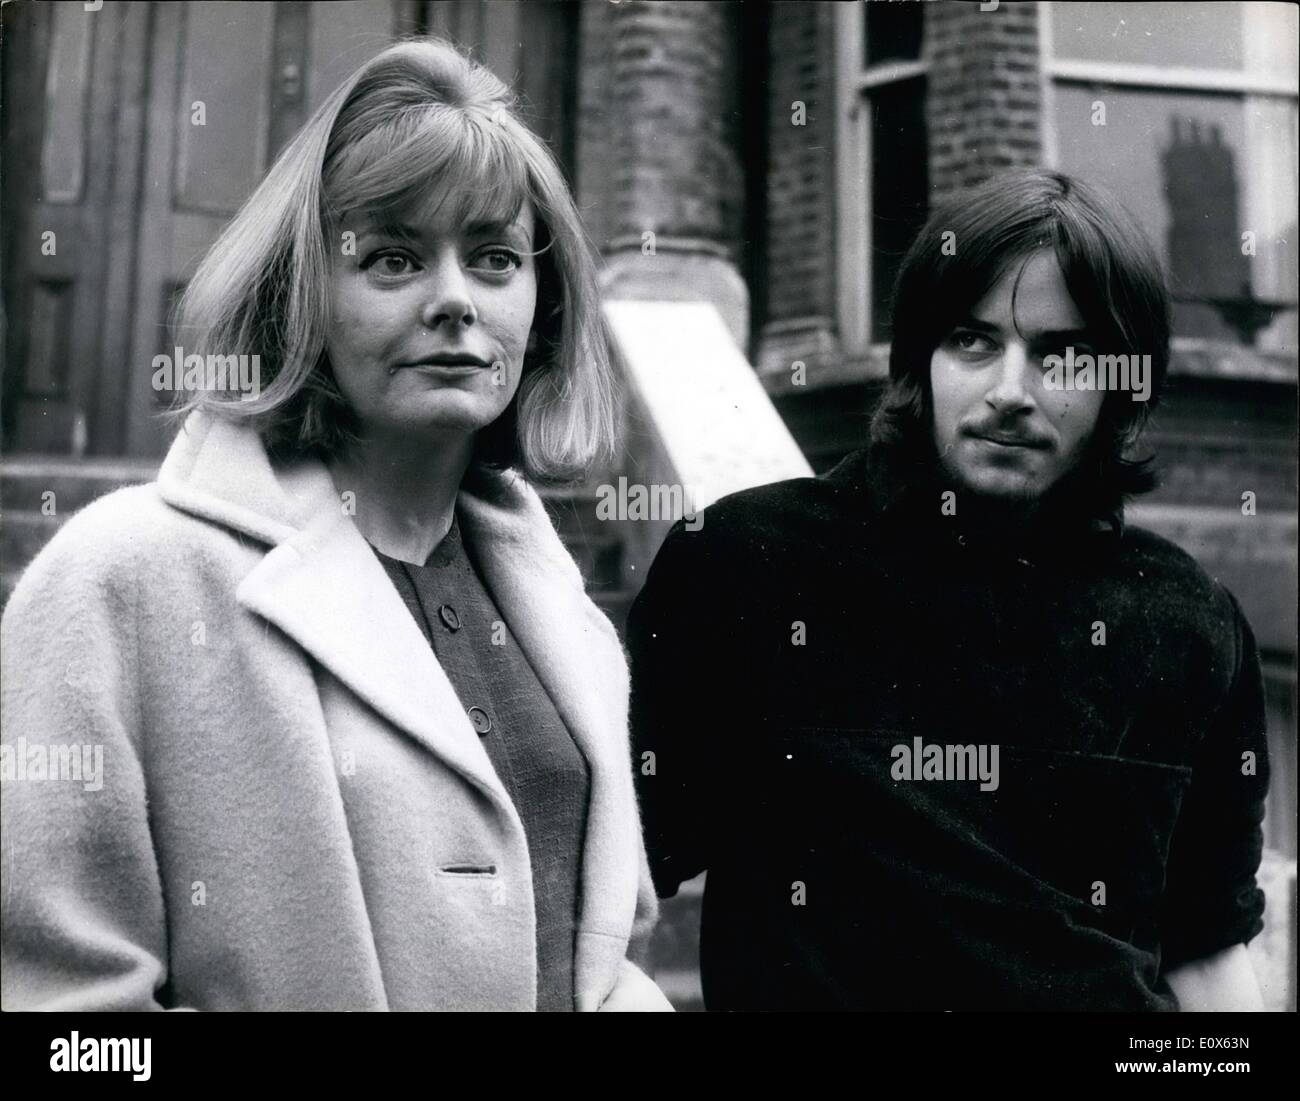 May 05, 1965 - Michael Chaplin, son of Charlie Chaplin and his wife, Patricia at their home in Hampstead. Stock Photo